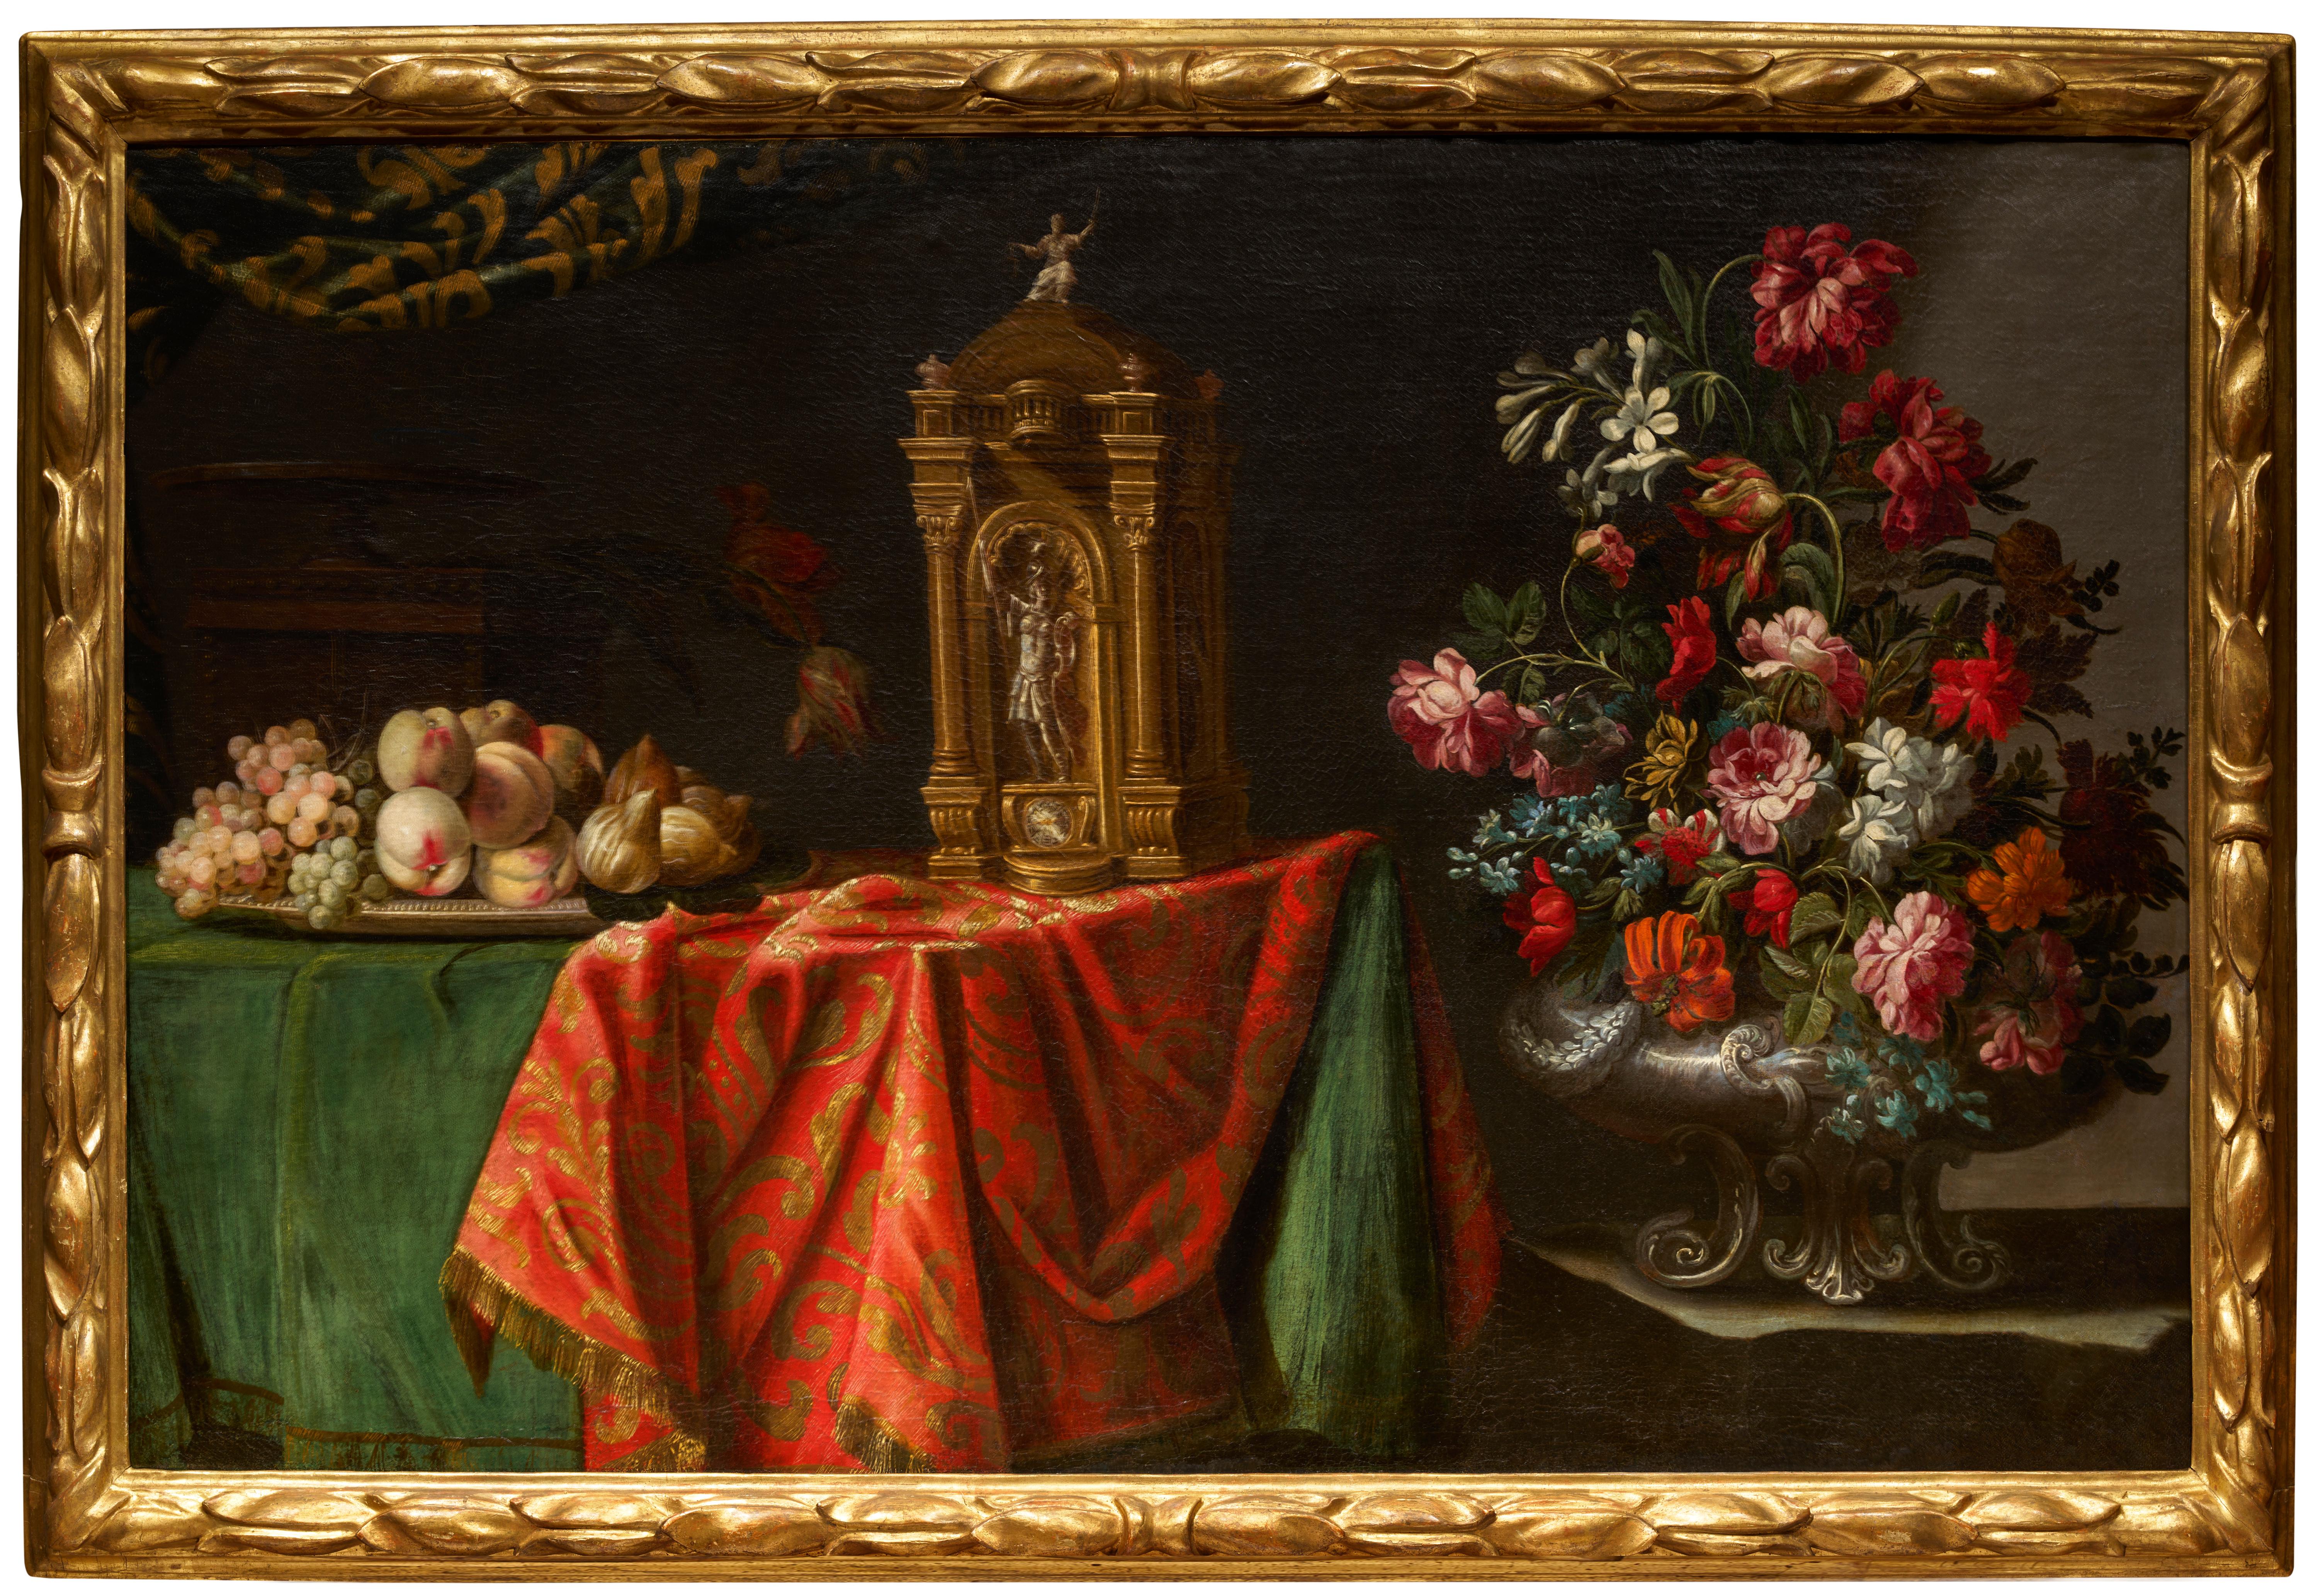 Baroque silver Vase with Flowers with a Fruit Tray and a Clock by A. Zuccati 